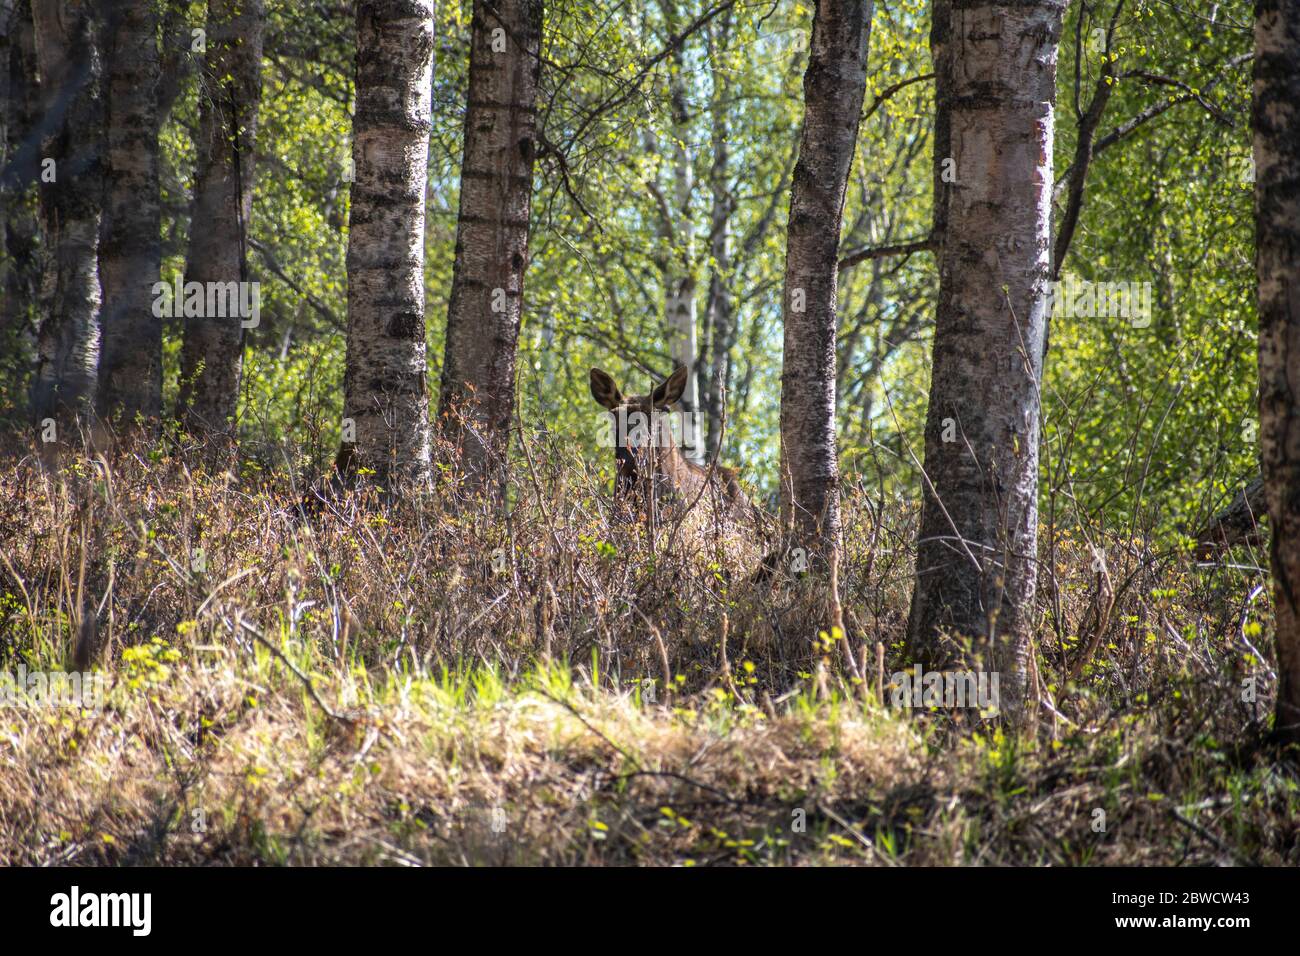 Playing peek a boo with a moose in the Alaskan Forest. Stock Photo